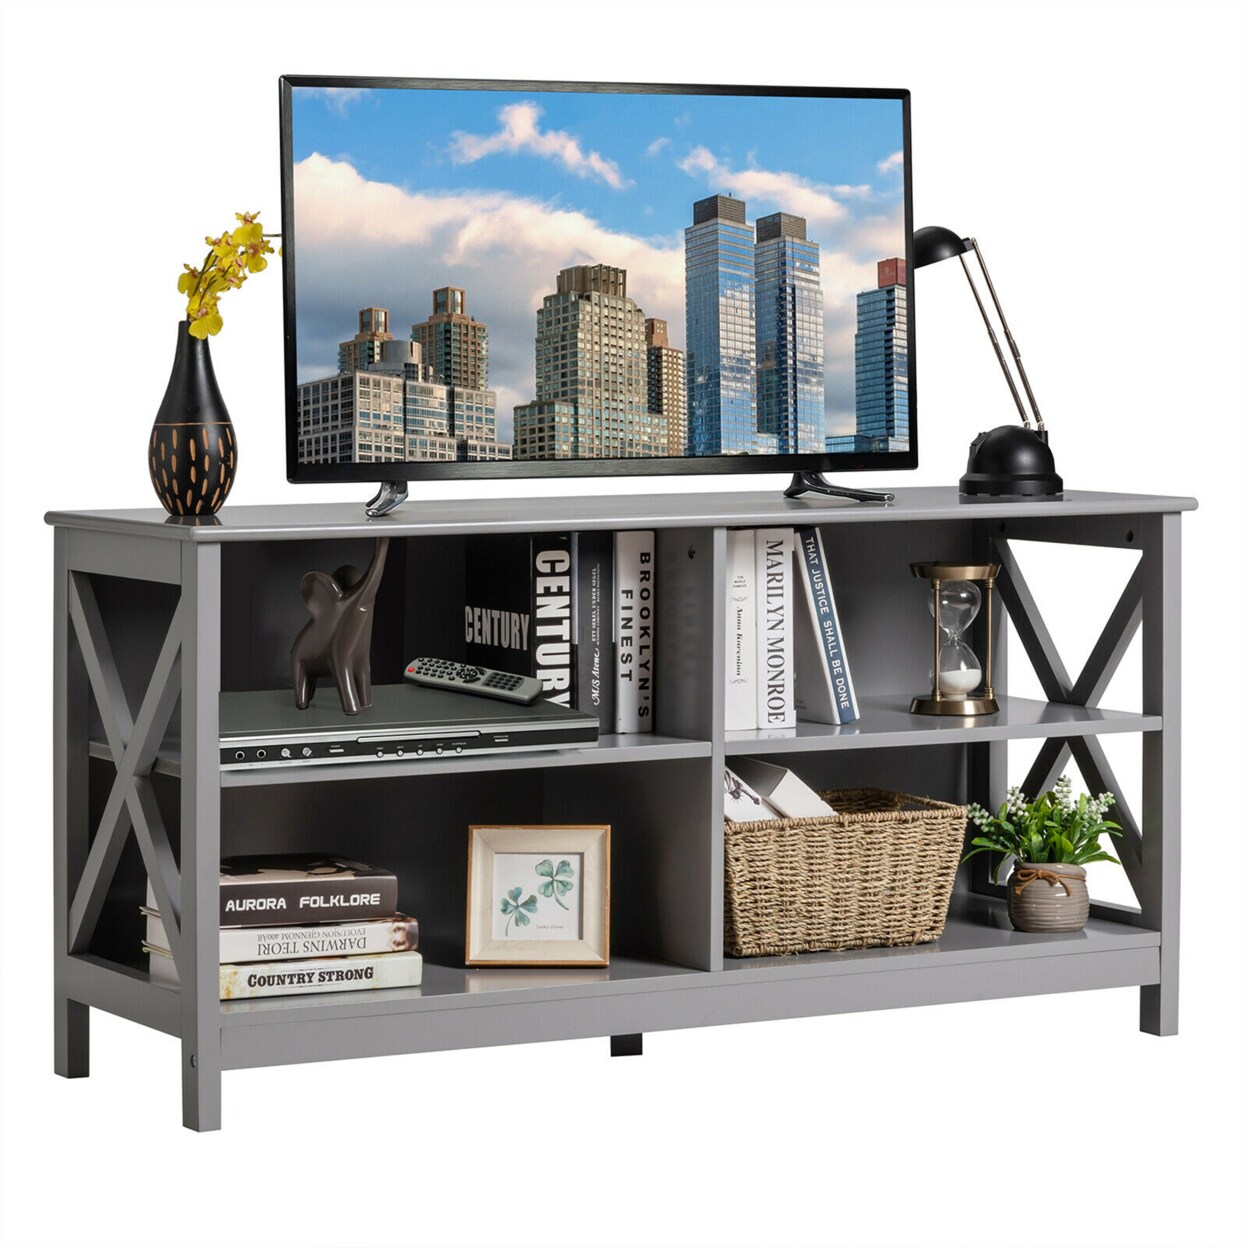 Gymax TV Stand Entertainment Media Center for TVs up to 55 w/ Storage Shelves Gray